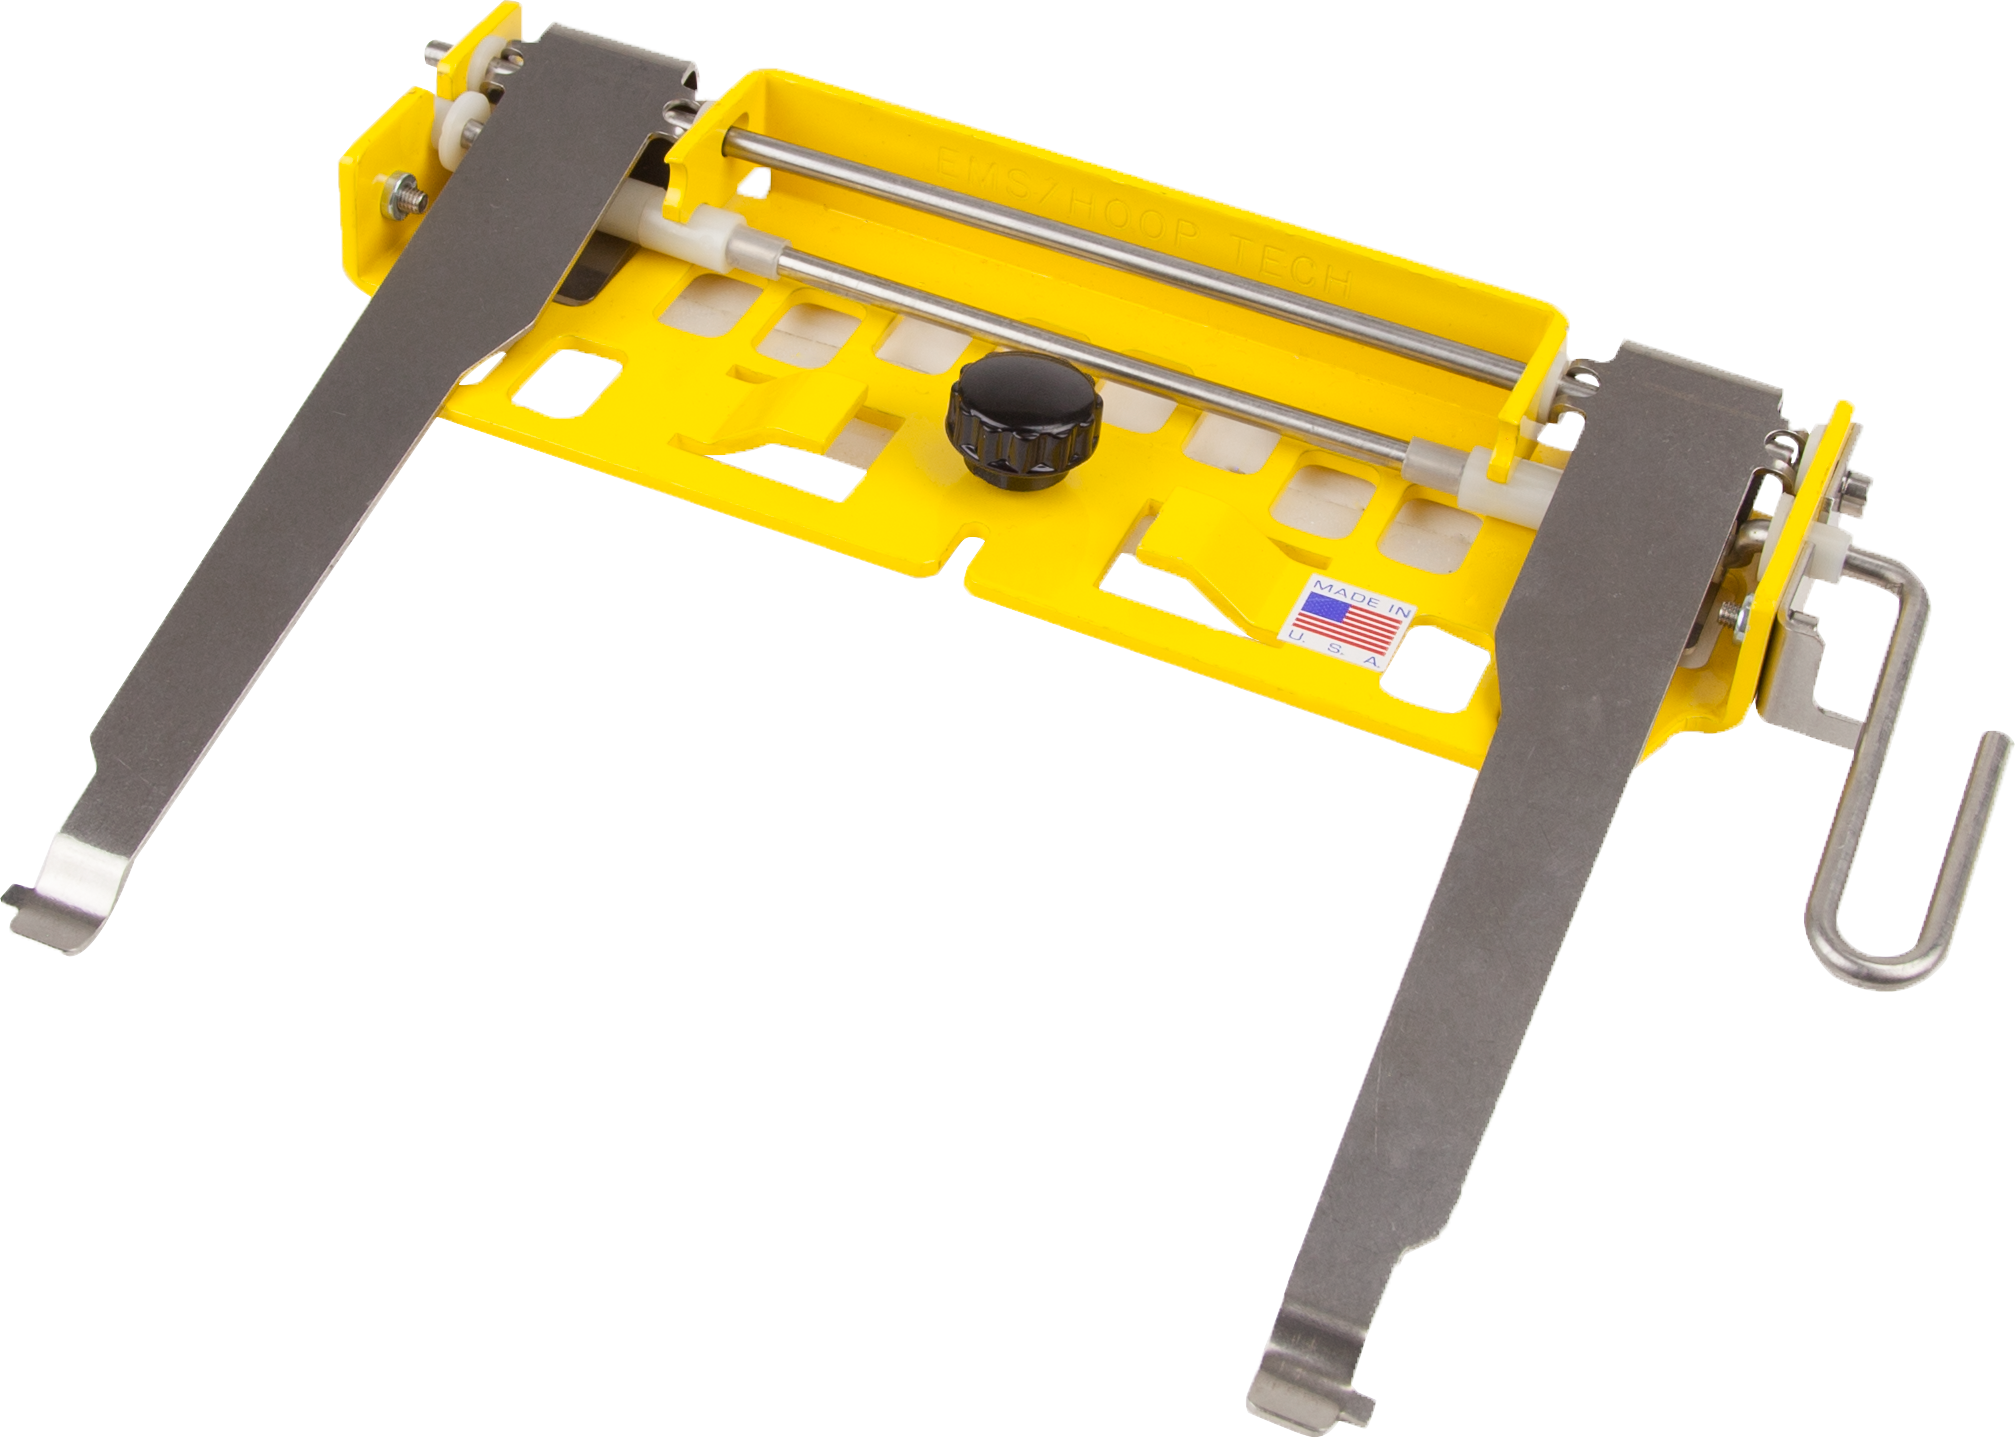 Slimline 1 Clamping System Chassis